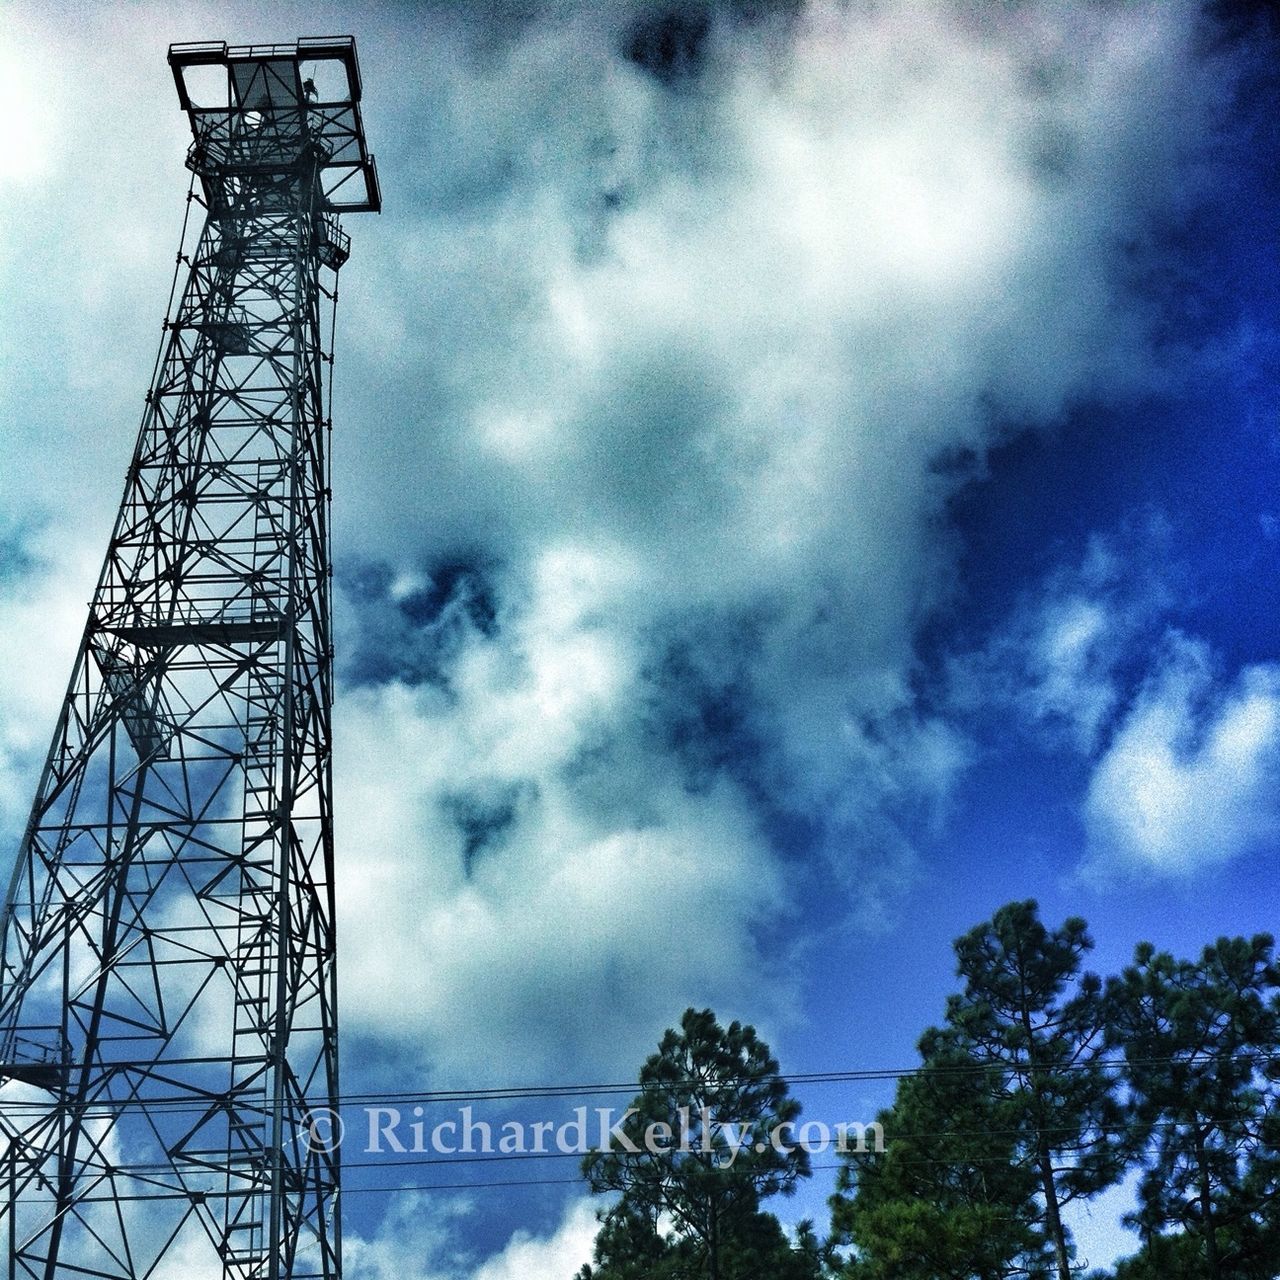 low angle view, sky, cloud - sky, cloudy, communication, electricity, tree, cloud, electricity pylon, connection, technology, weather, fuel and power generation, overcast, outdoors, day, silhouette, dusk, power supply, no people